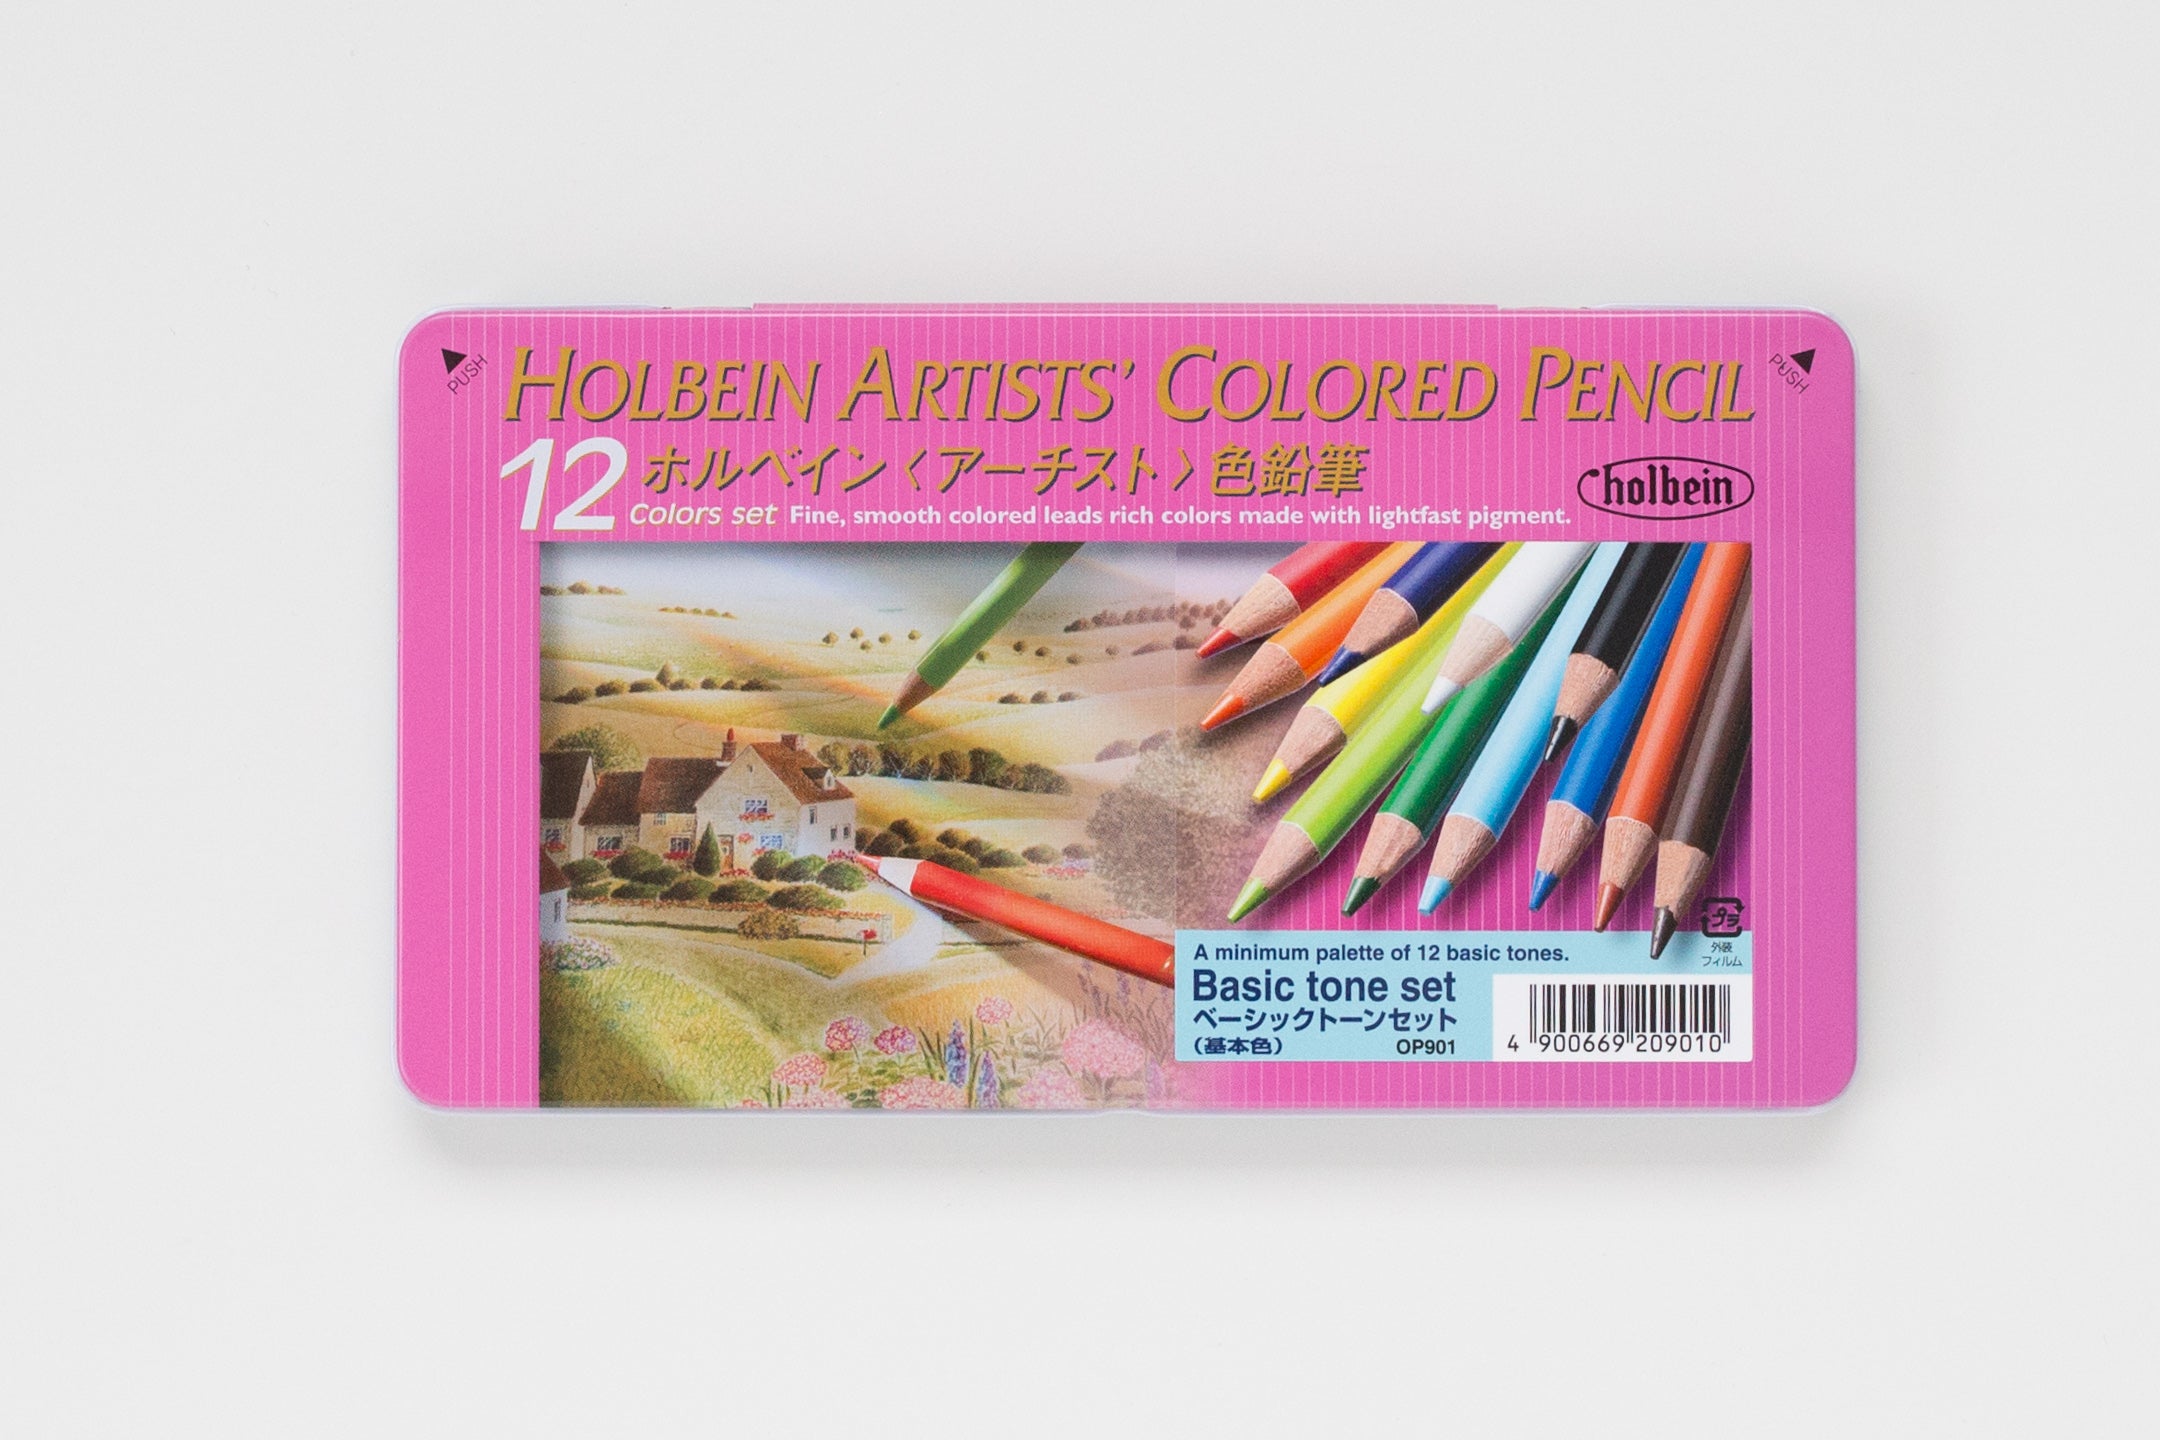 OP901 'Set 12C Basic Tone' Colored Pencil Holbein